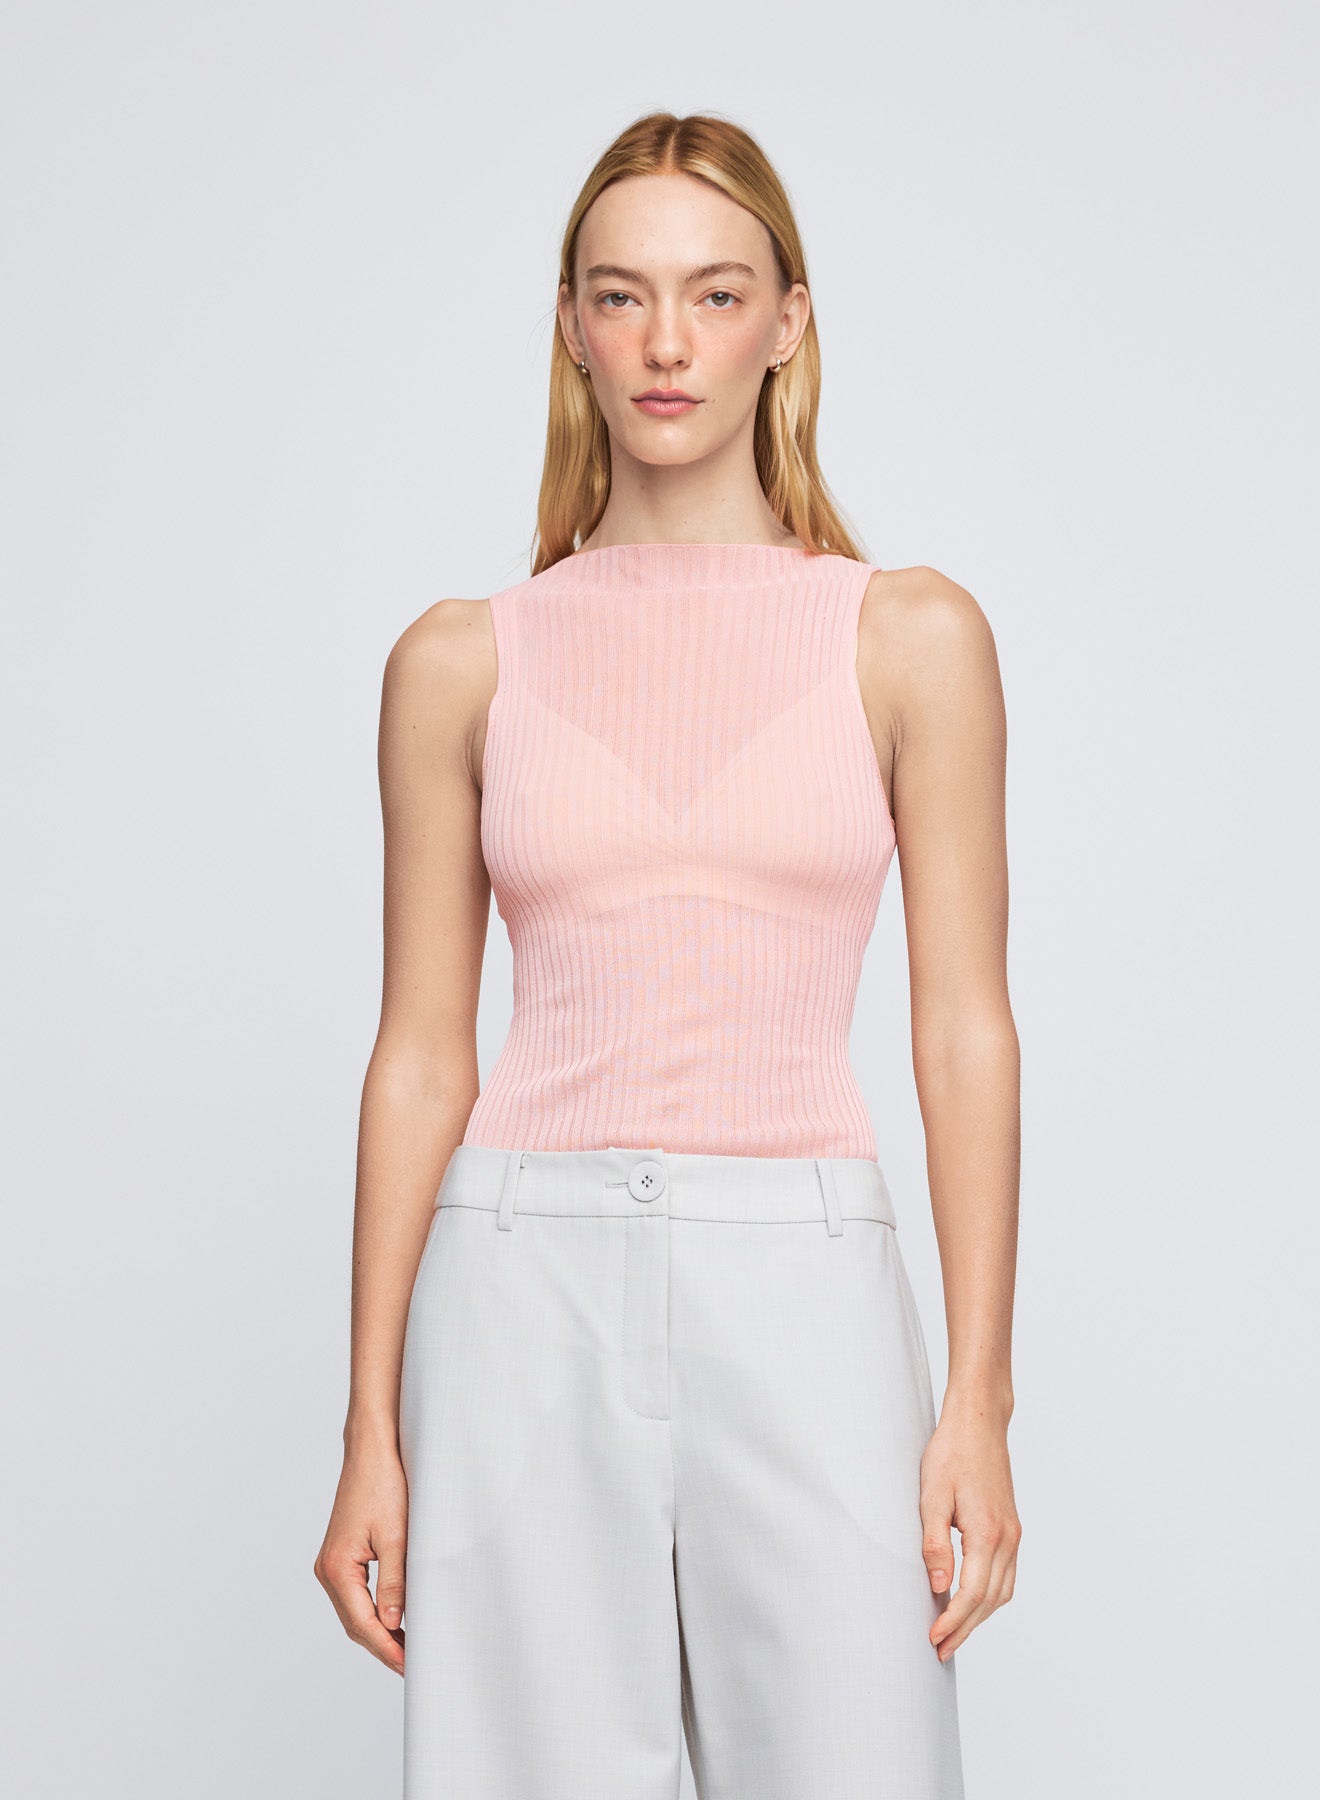 The ANNA QUAN Petra Top in Sakura is an elevated essential, crafted in a sheer knit material. Featuring a wide high neckline and sleeveless design for effortless layering.